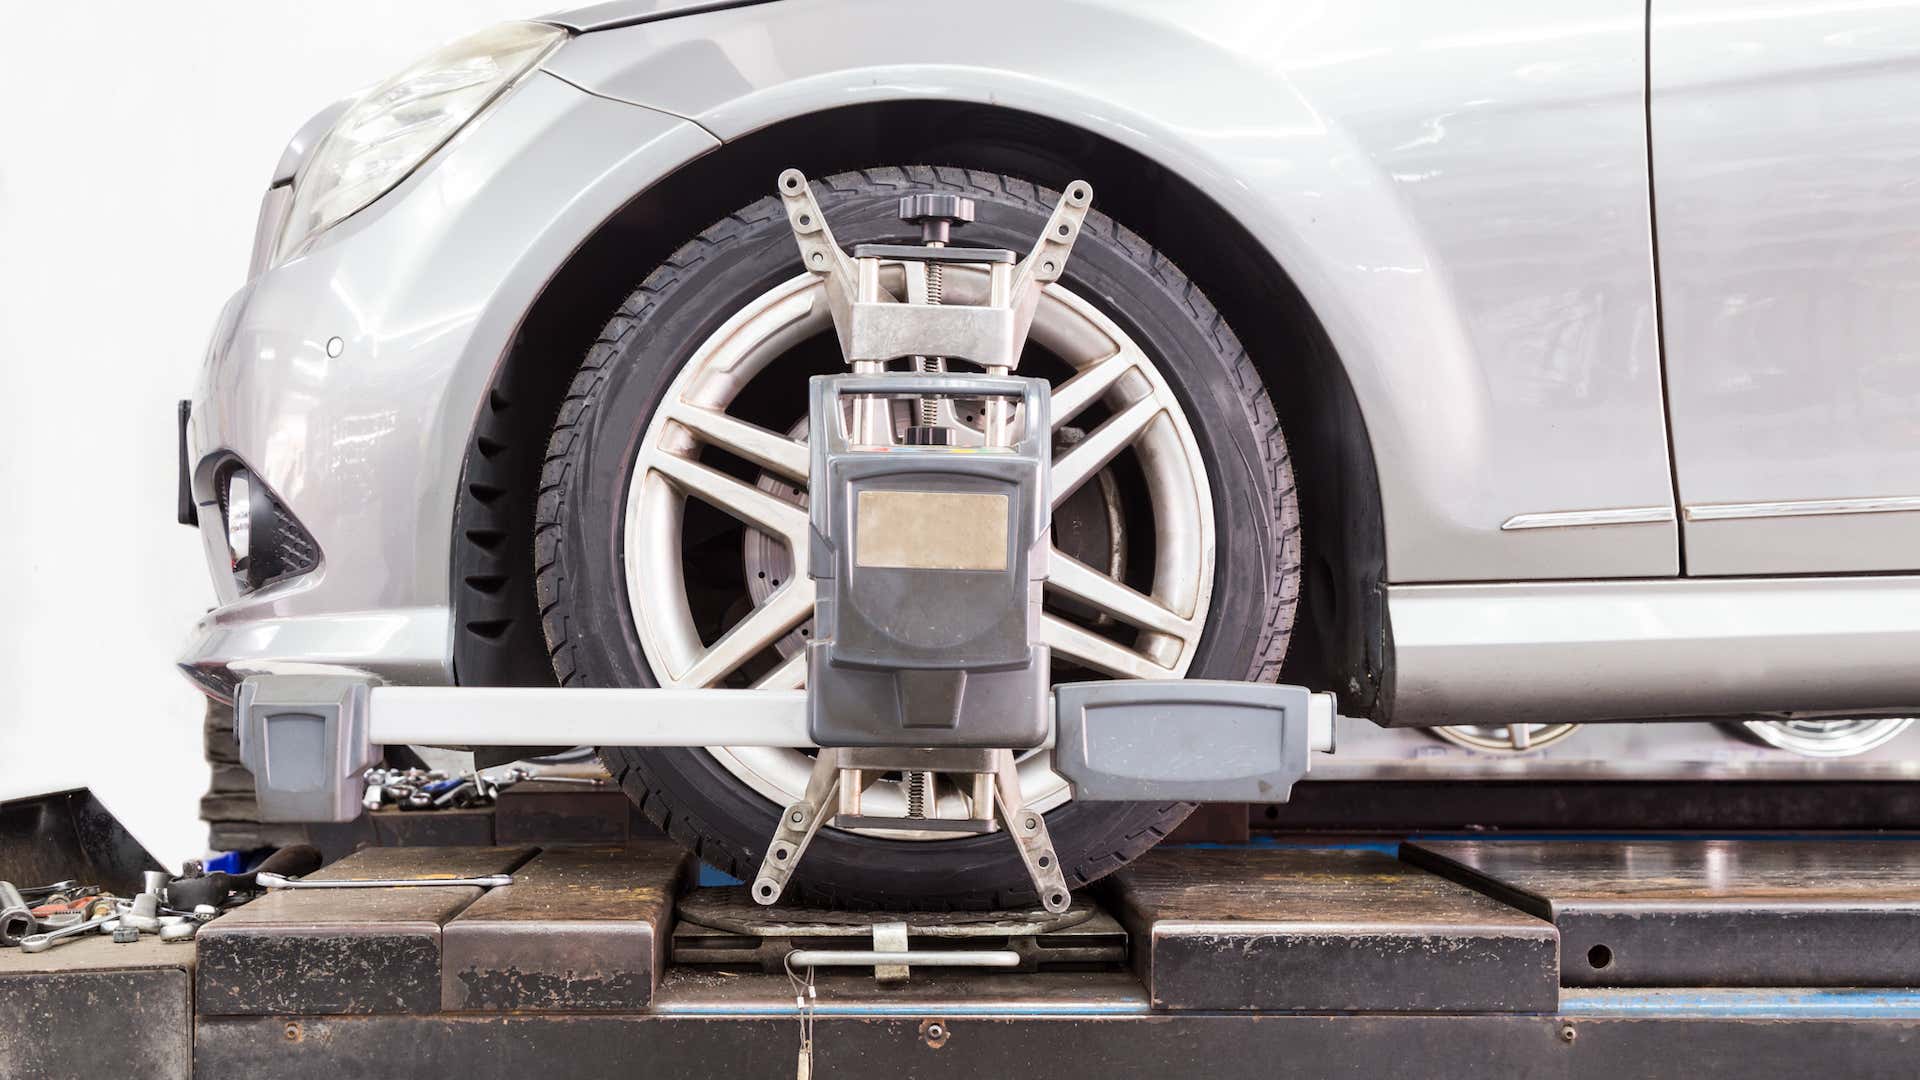 A wheel alignment tool is attached to the front driver's side tire of the car.